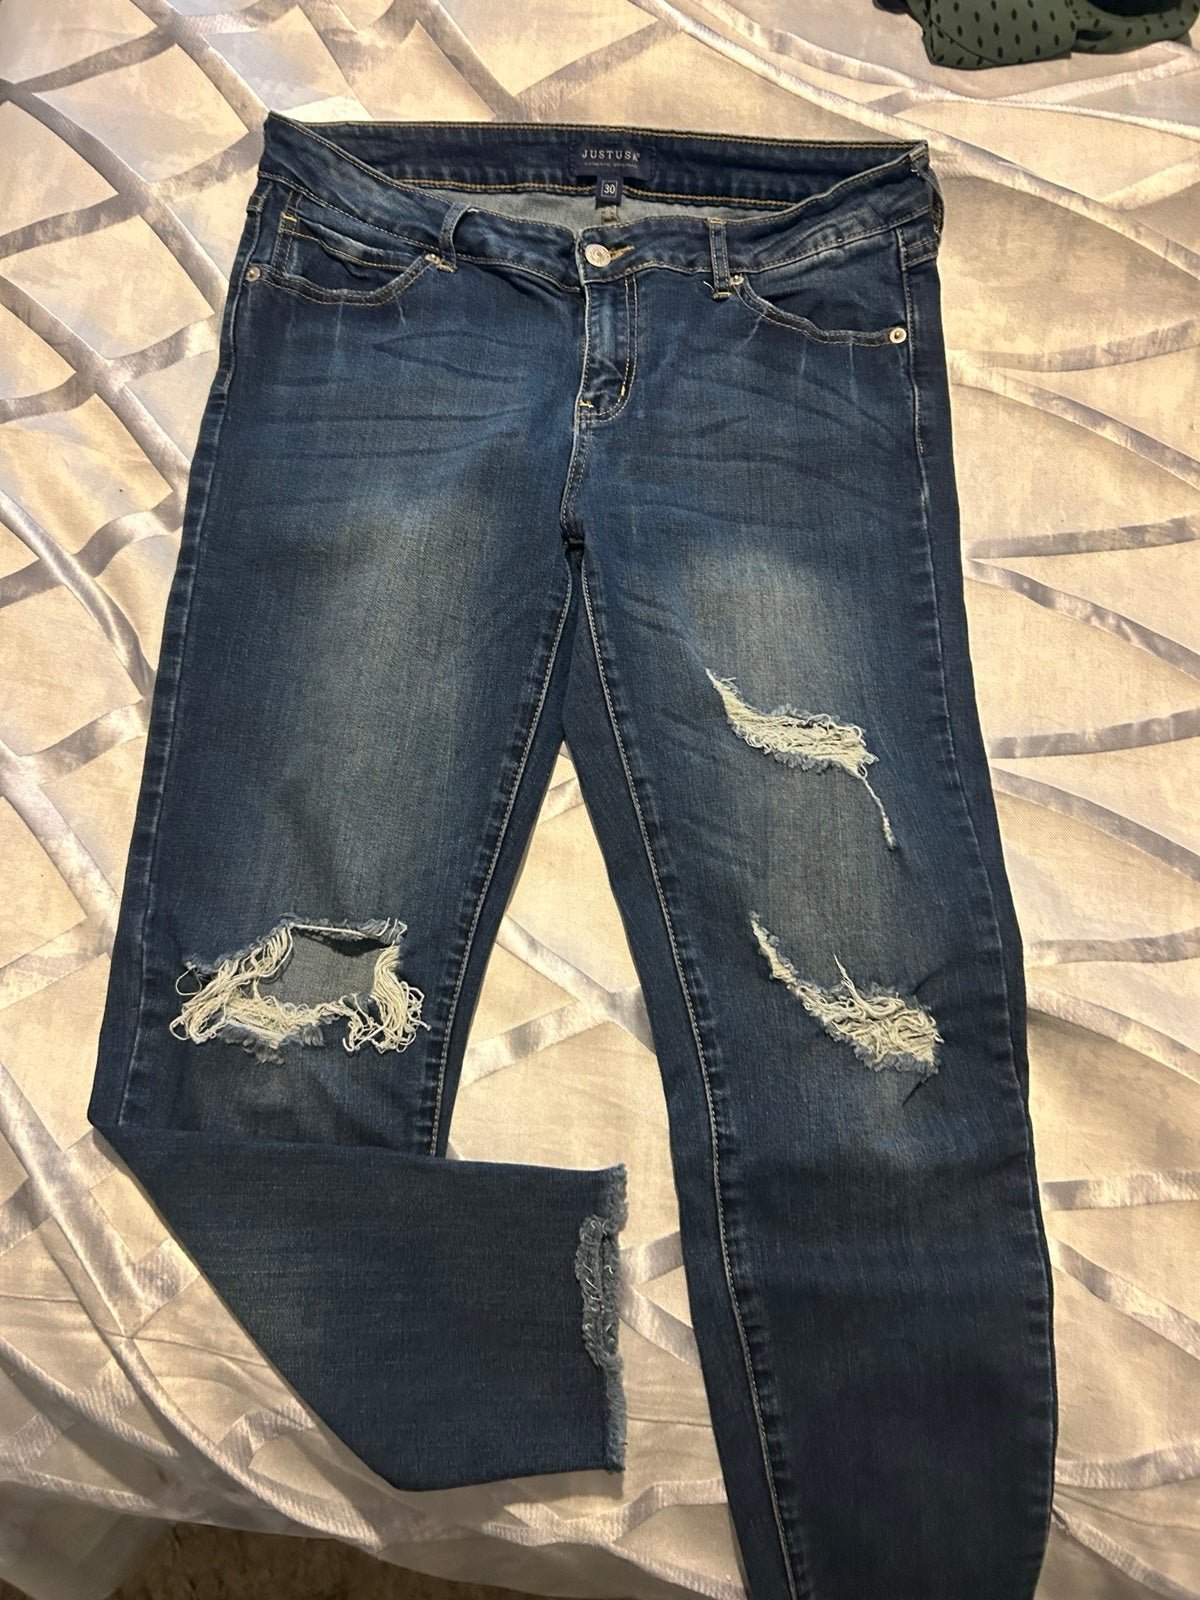 High quality womens jeans JPW19o4Vs Outlet Store